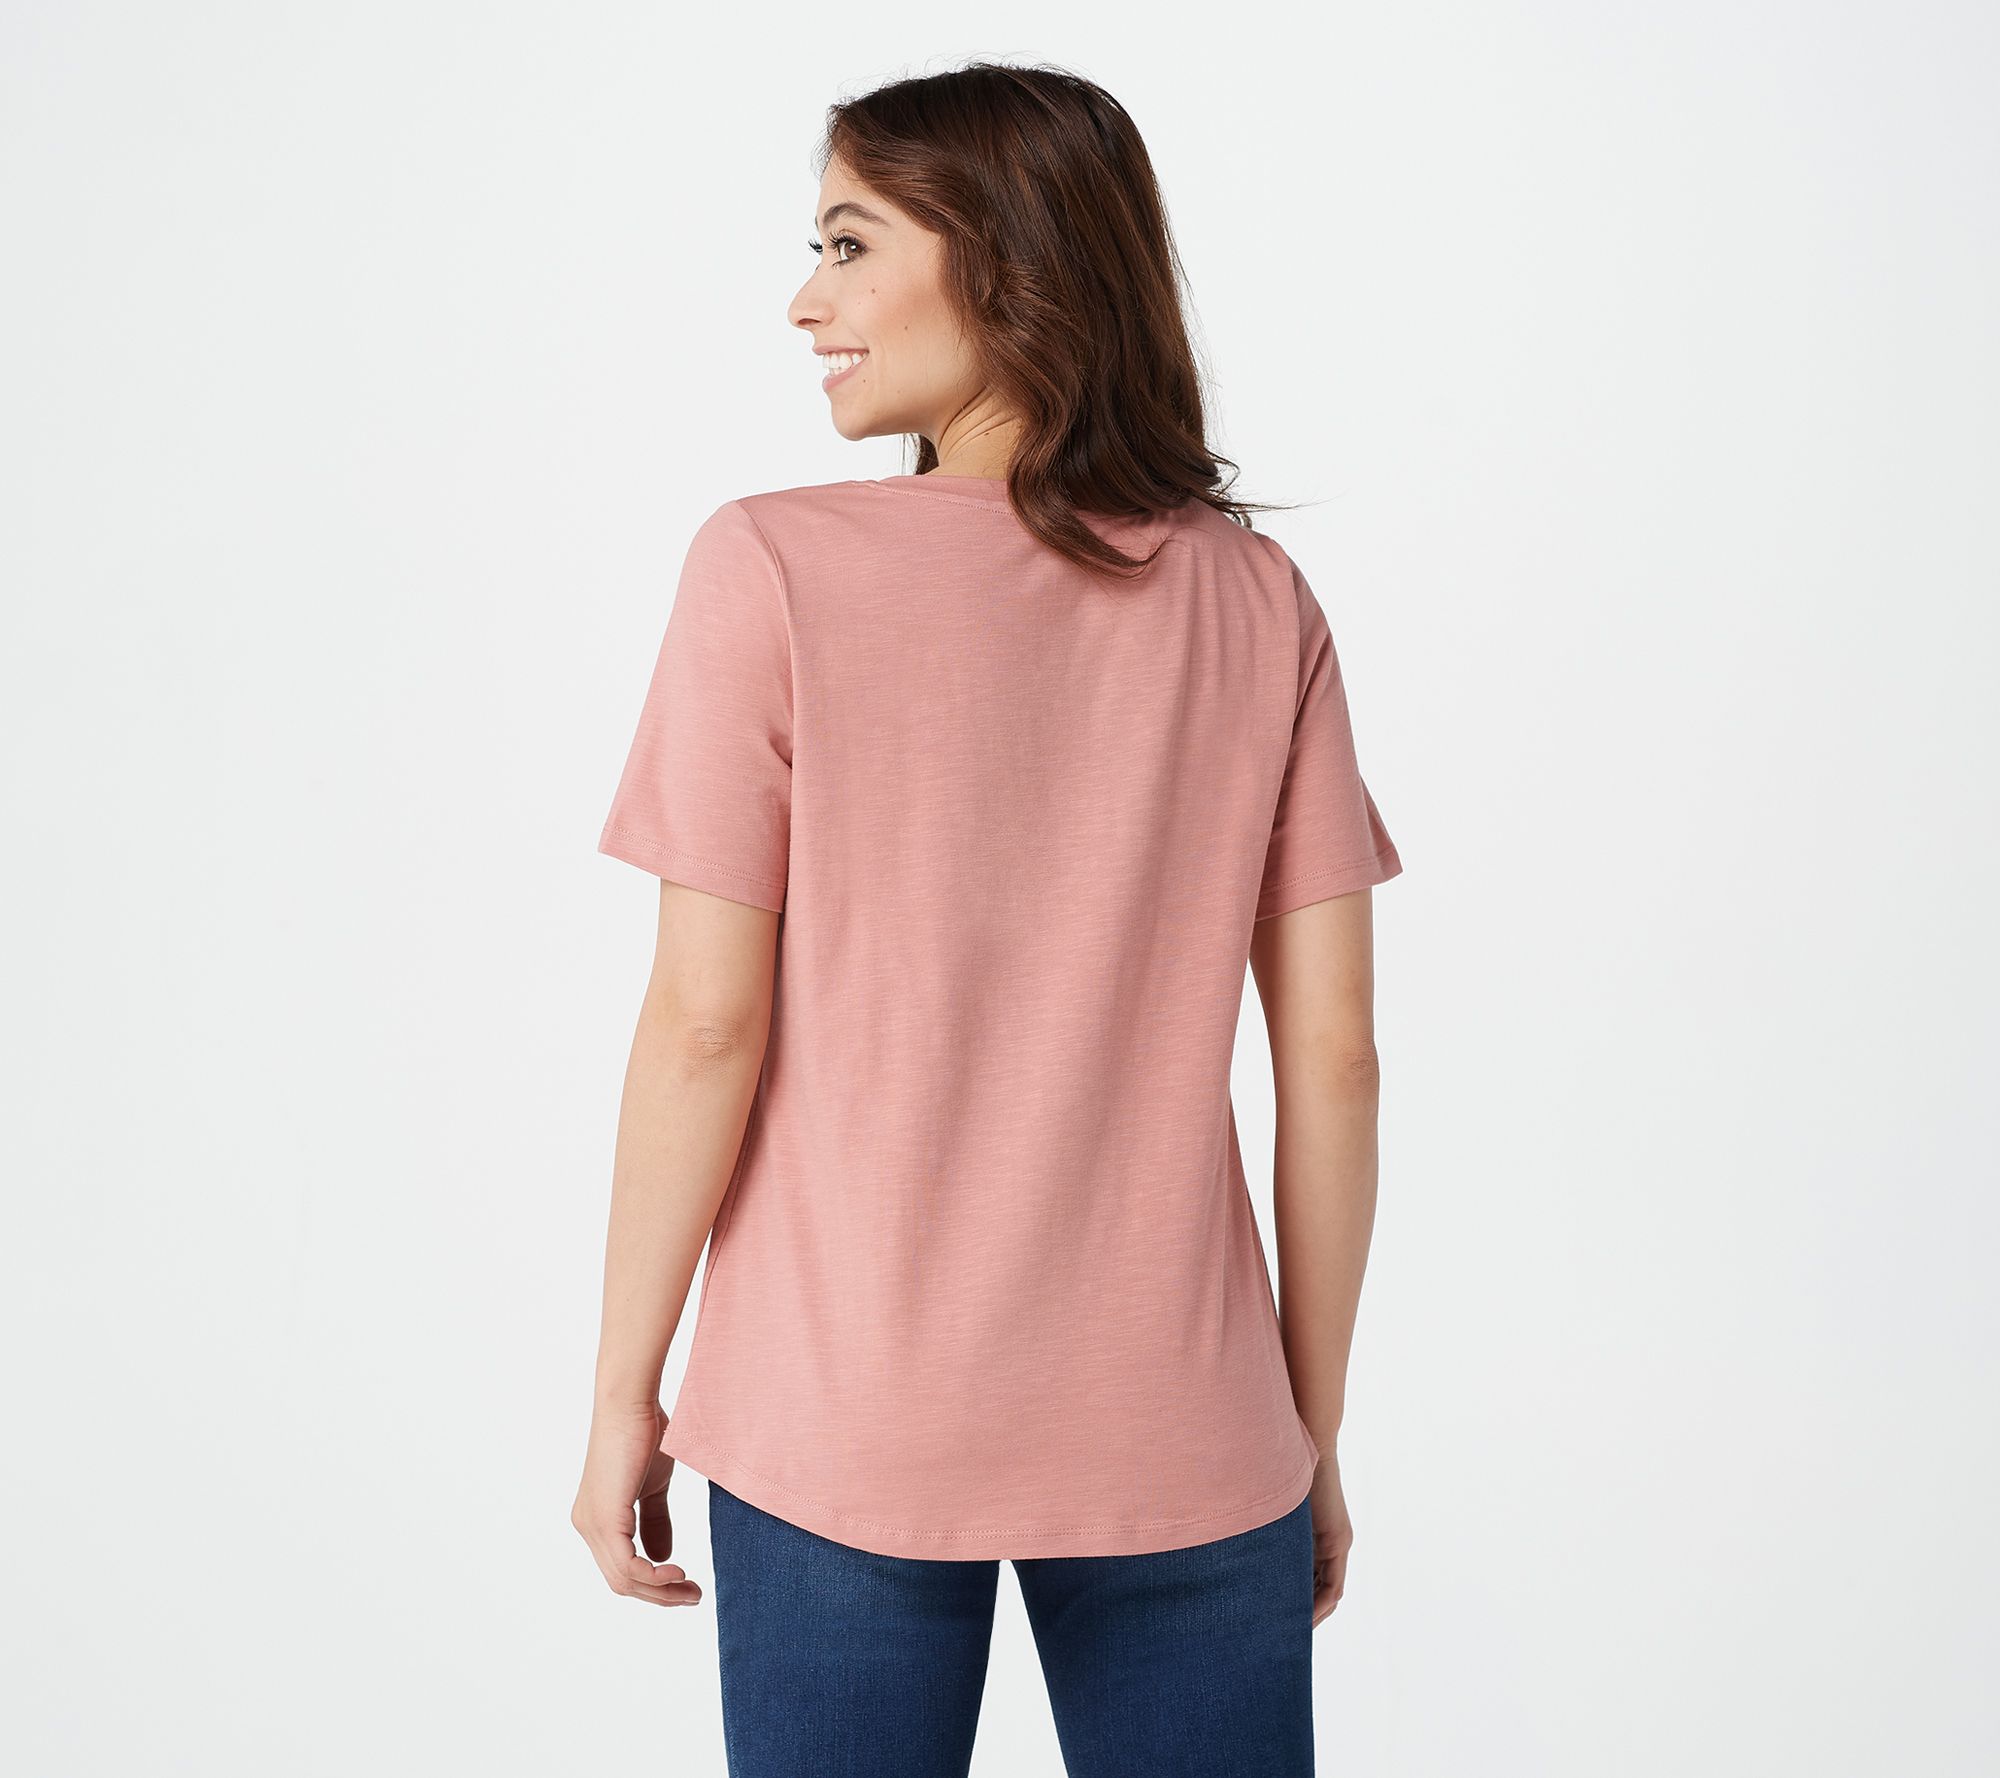 Cuddl Duds Seriously Soft Elbow-Sleeve Top 